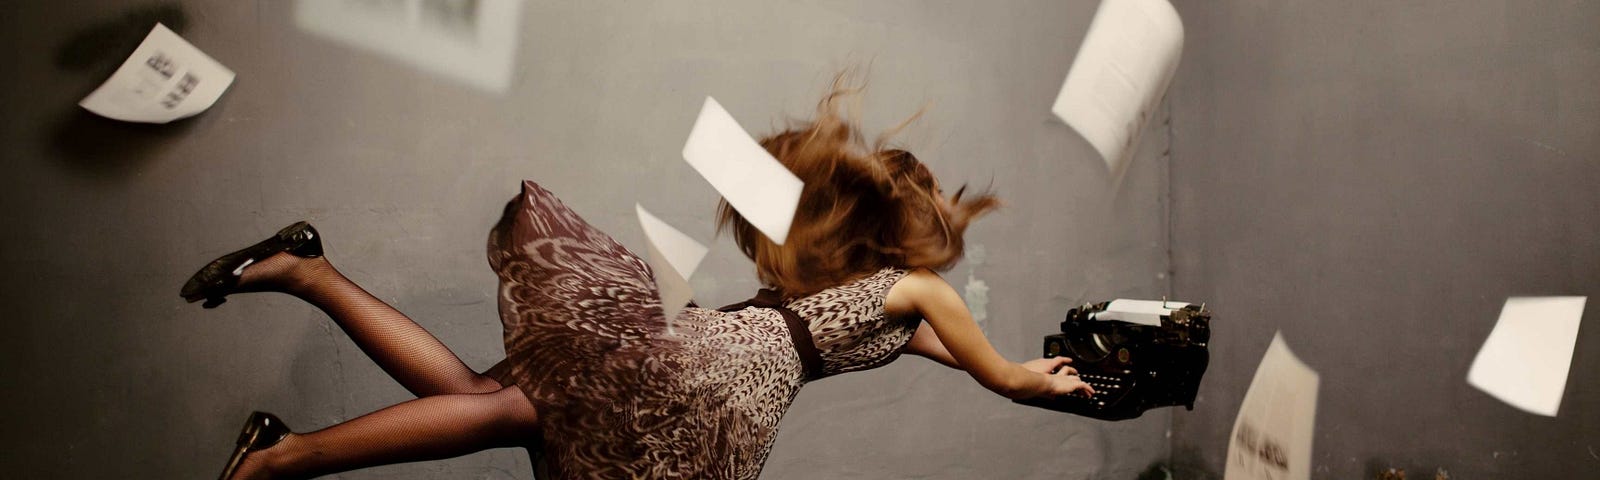 woman floating in air wearing a dress typing on a typewriter while blurry papers fall around her